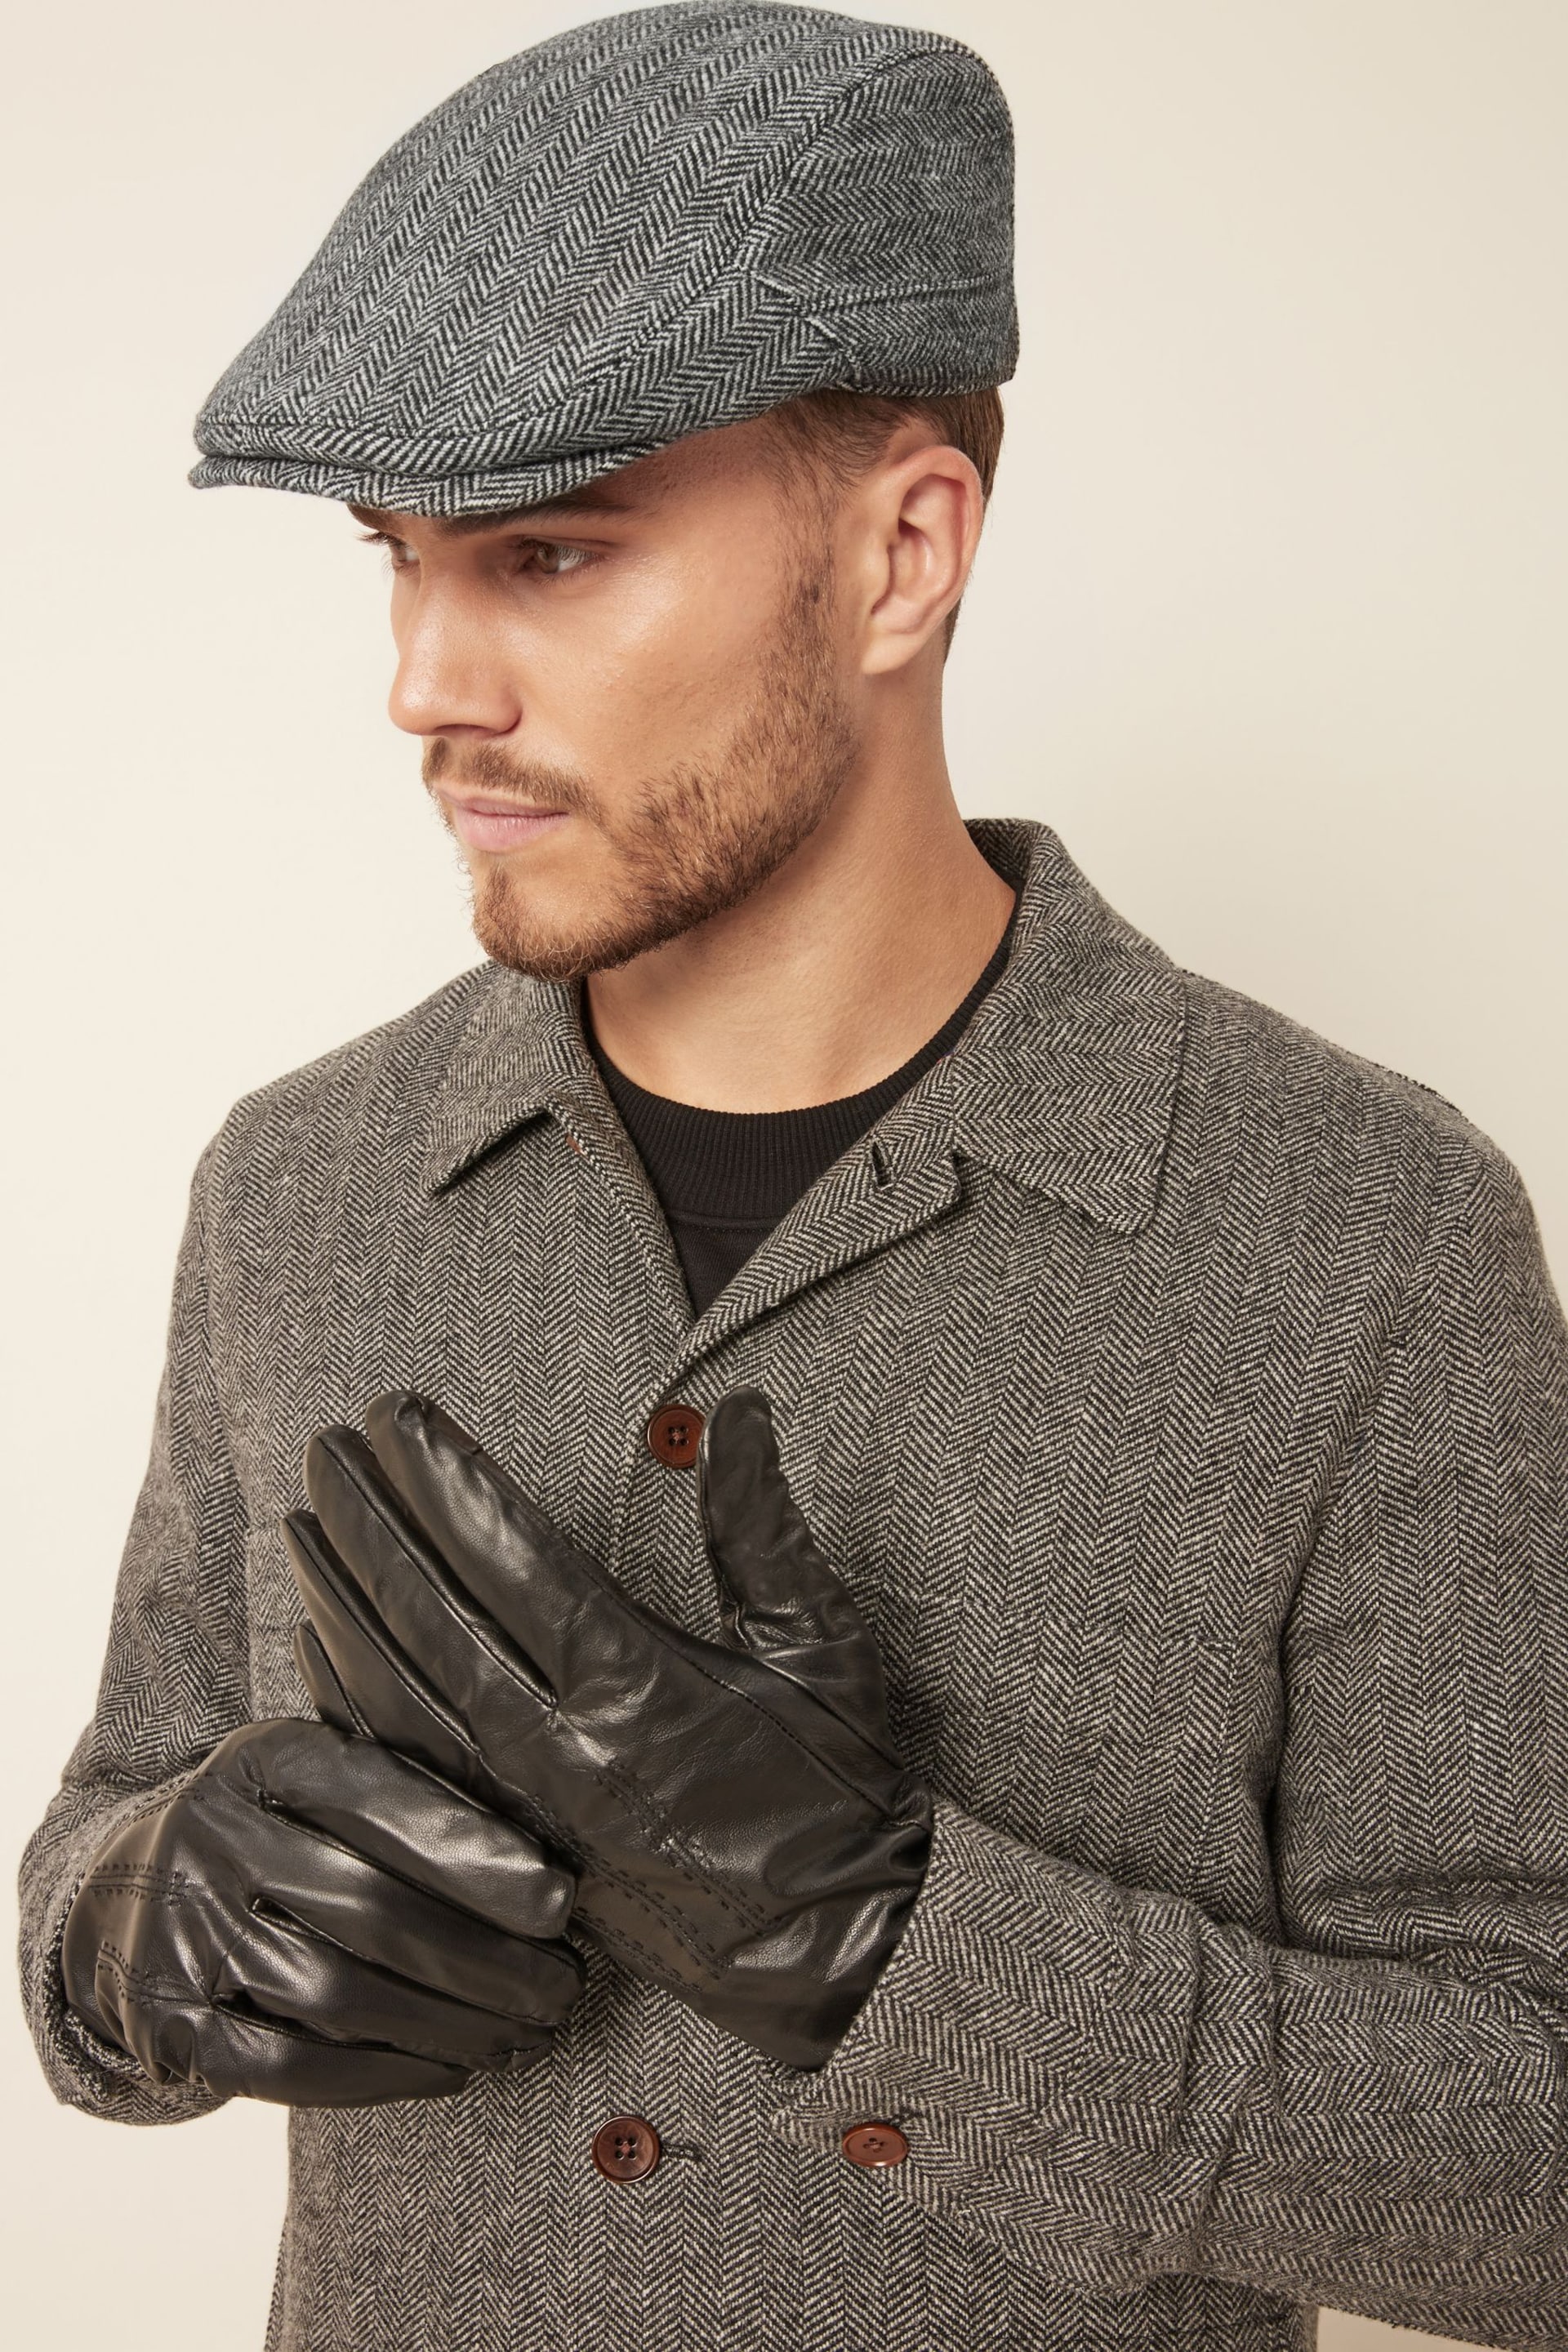 Grey/Black Texture Flatcap and Leather Gloves Set - Image 1 of 8